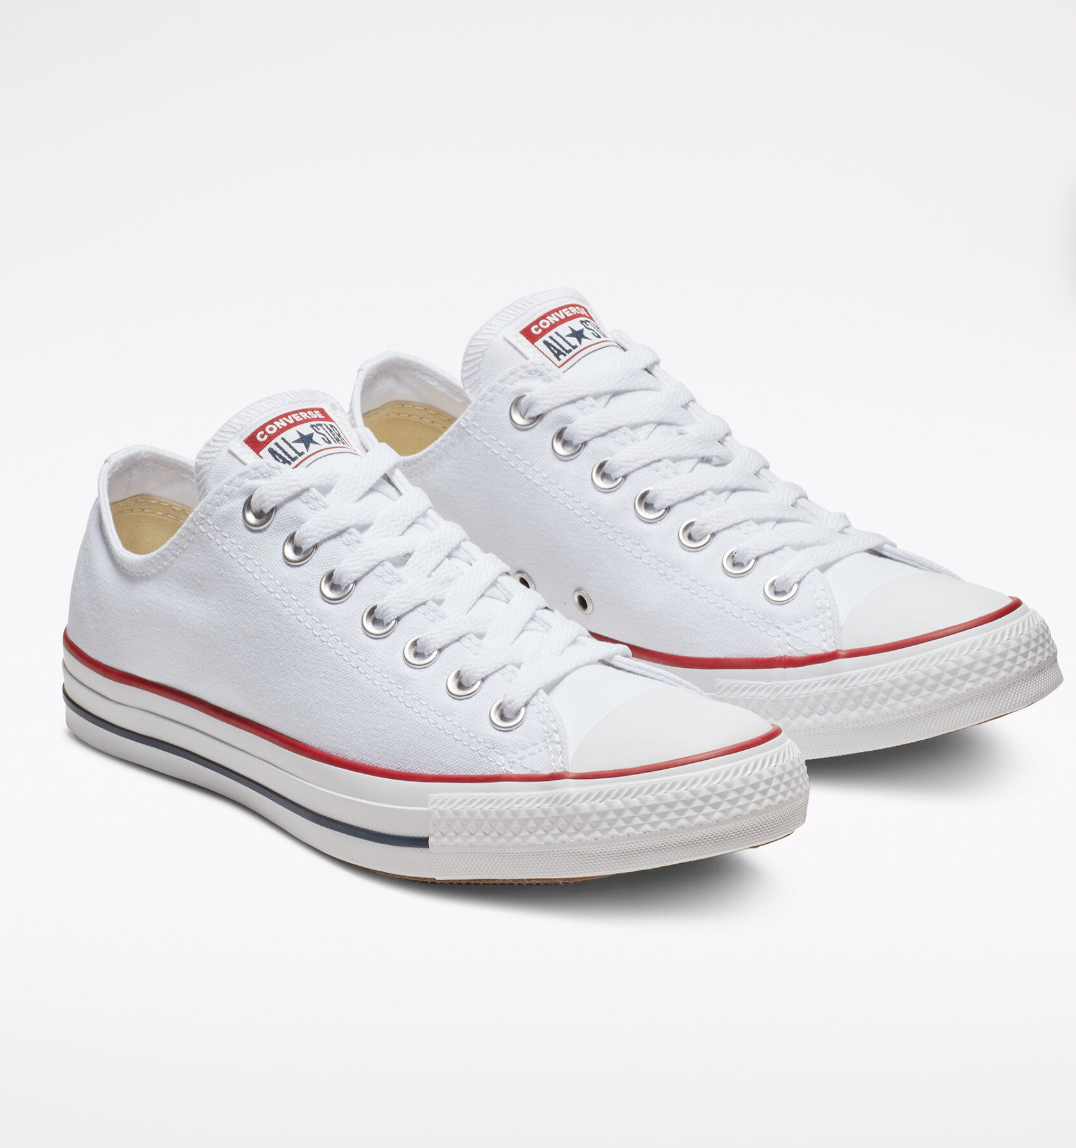 Converse All Star Low-Top Sneakers